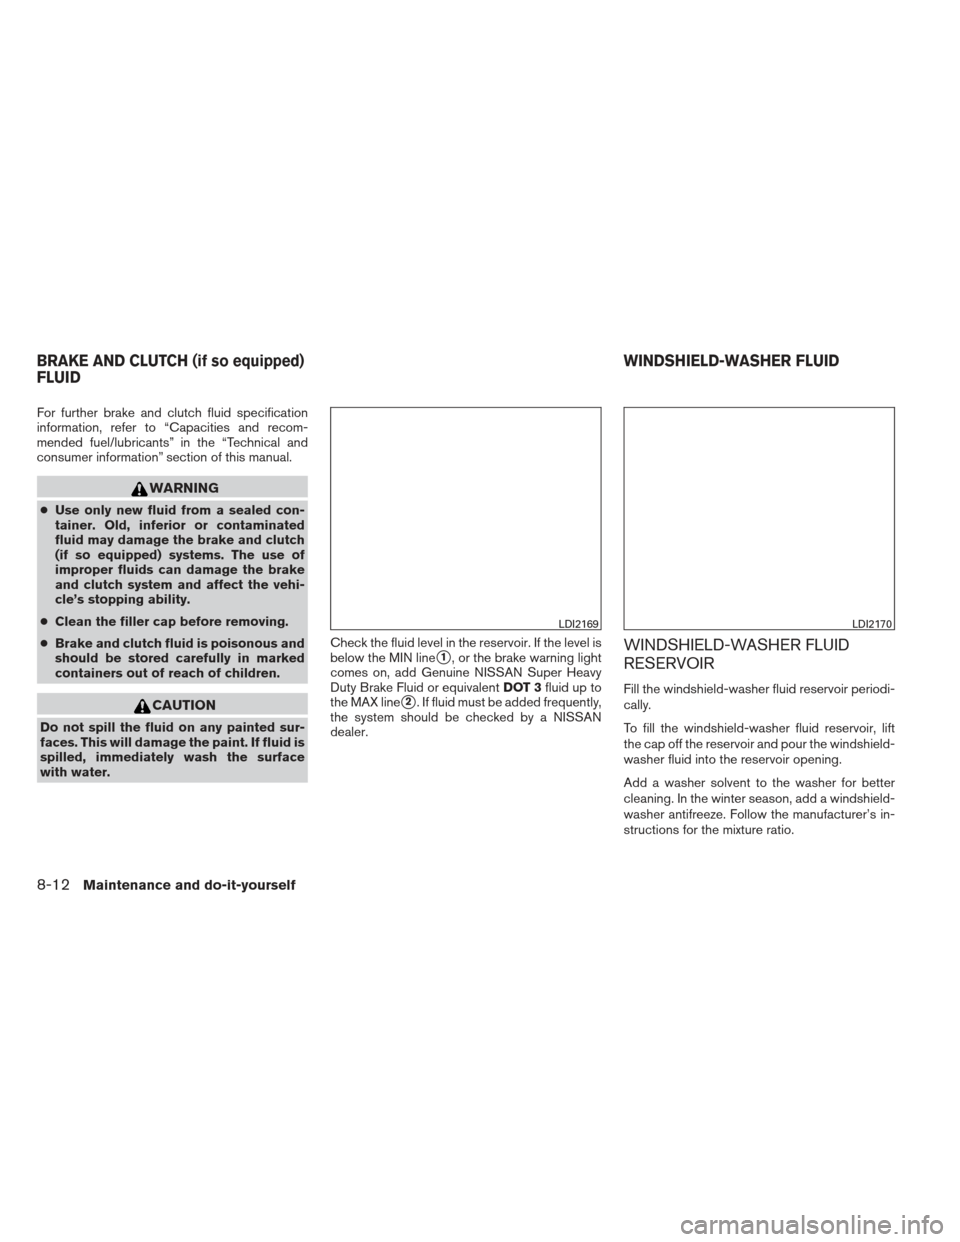 NISSAN SENTRA 2013 B17 / 7.G Owners Manual For further brake and clutch fluid specification
information, refer to “Capacities and recom-
mended fuel/lubricants” in the “Technical and
consumer information” section of this manual.
WARNIN